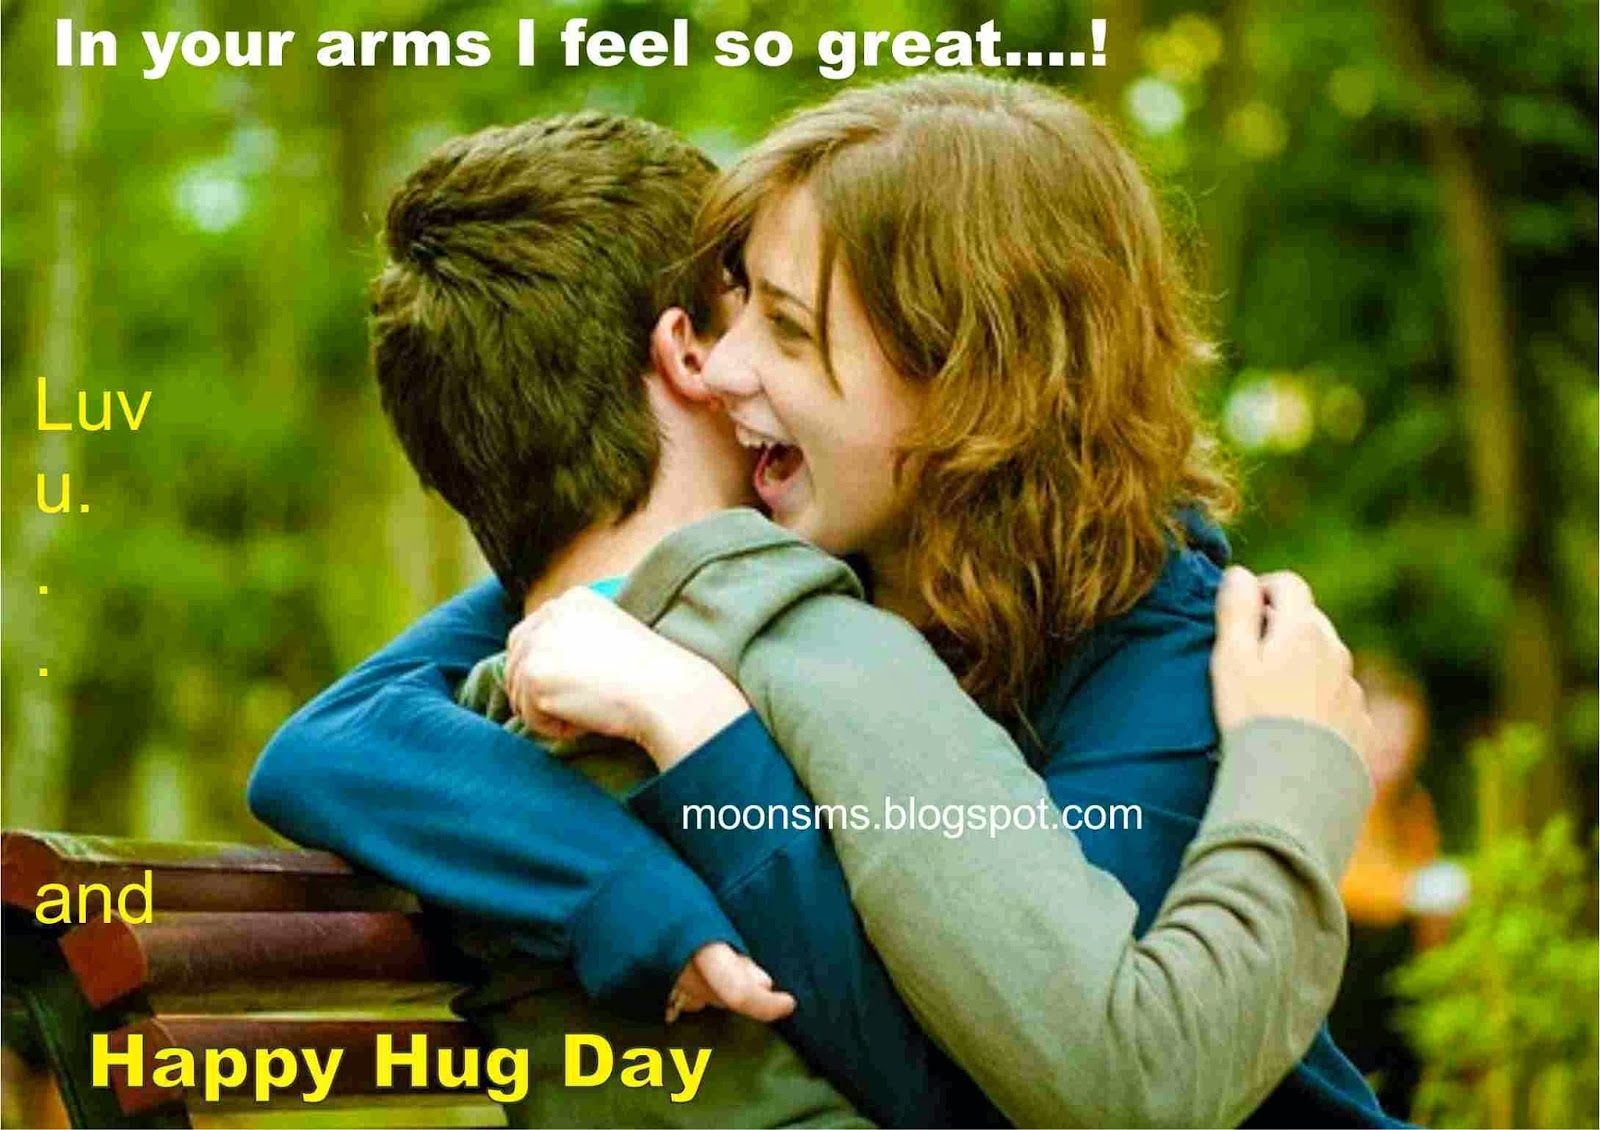 Happy Hug Day sms text message wishes quotes Hug day HD gif